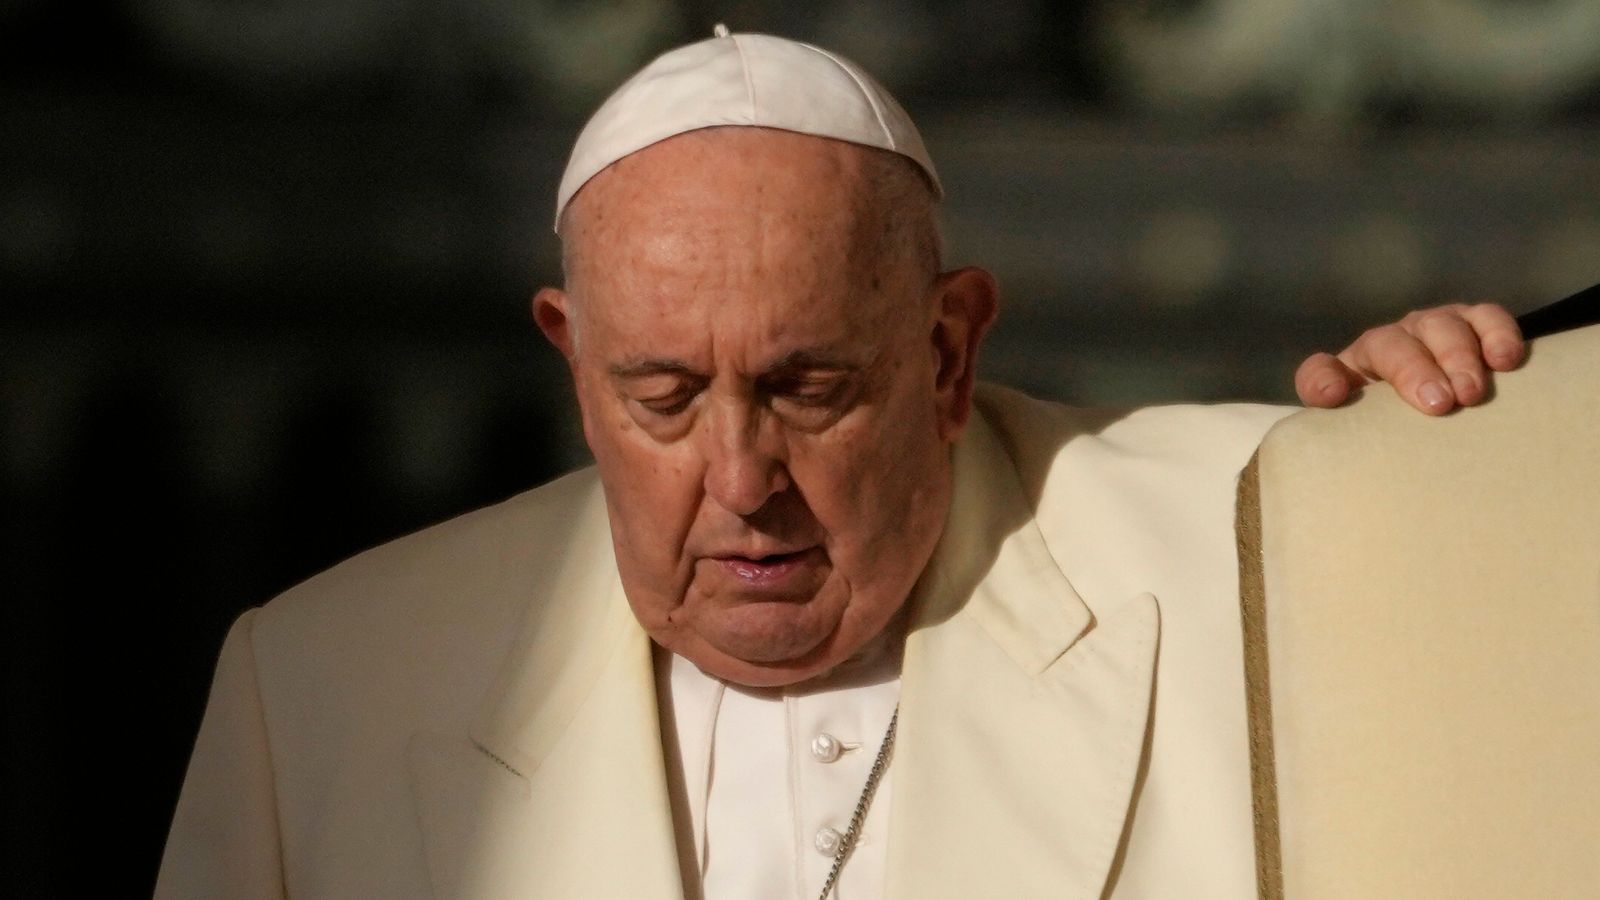 Pope Francis cancels audiences due to 'mild flu' and has hospital tests